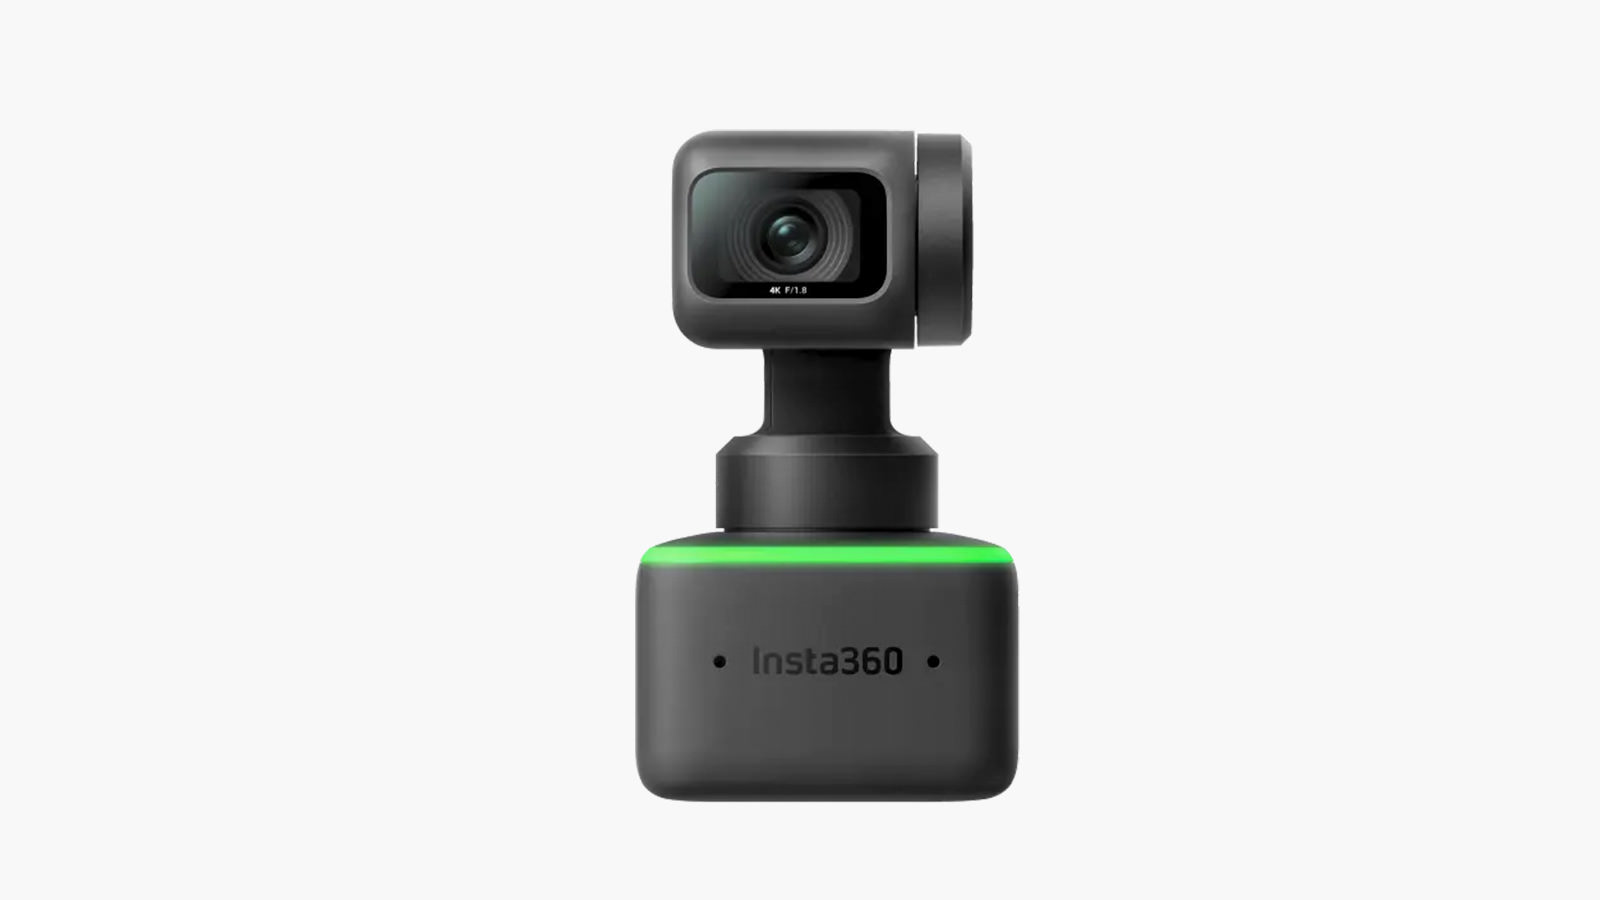 The Insta360 Link Is Not IMBOLDN Average Webcam - Your